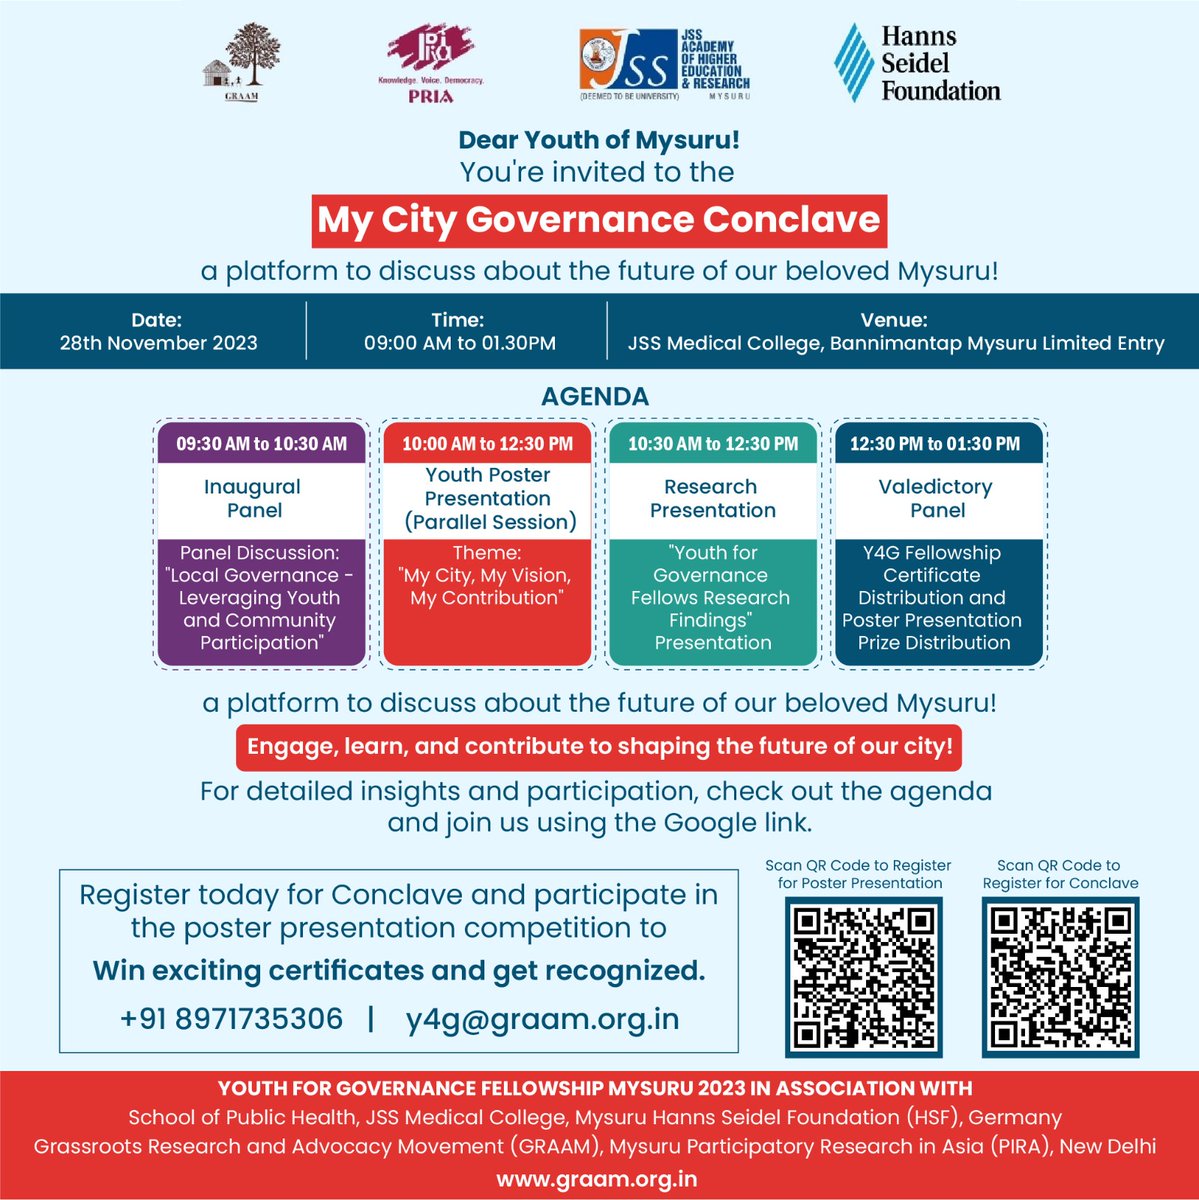 Dear Youth of Mysuru ! You're invited to the 'My City Governance Conclave' - a platform to discuss about the future of our beloved Mysuru!  
#MyCityConclave #YouthEngagement #MysuruFuture #LocalGovernance #YouthParticipation #CommunityVoice  #CityVision #YouthInAction